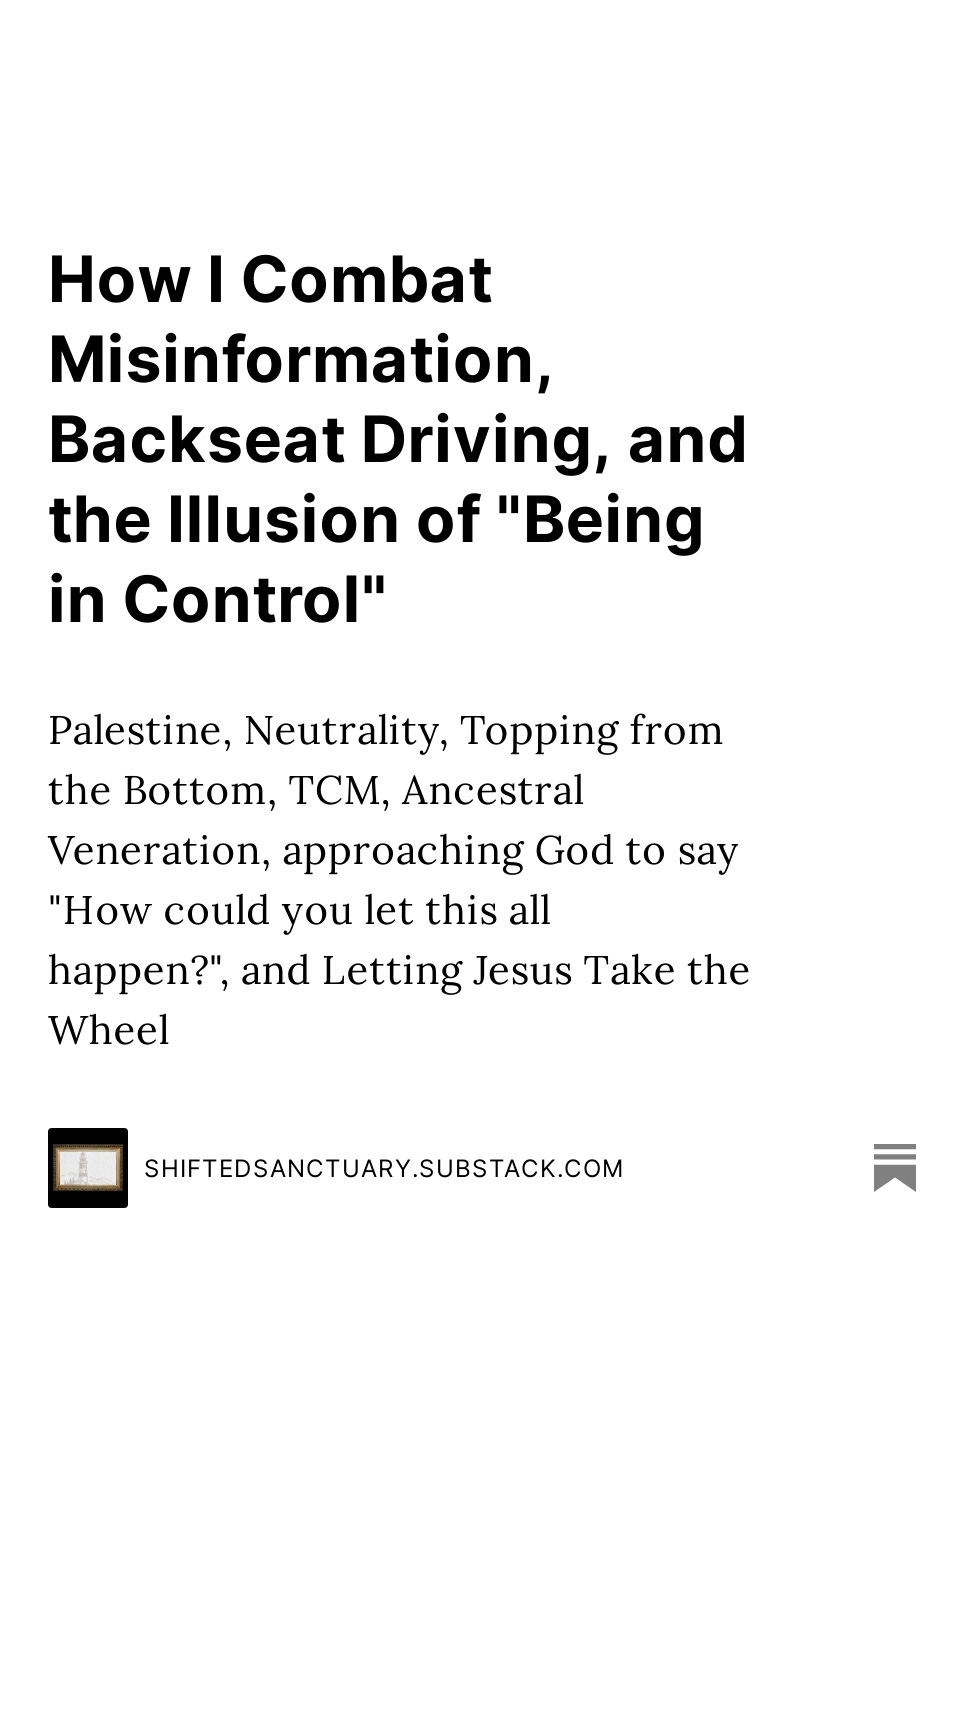 Read: How I Combat Misinformation, Backseat Driving, and the Illusion of "Being in Control" thumbnail